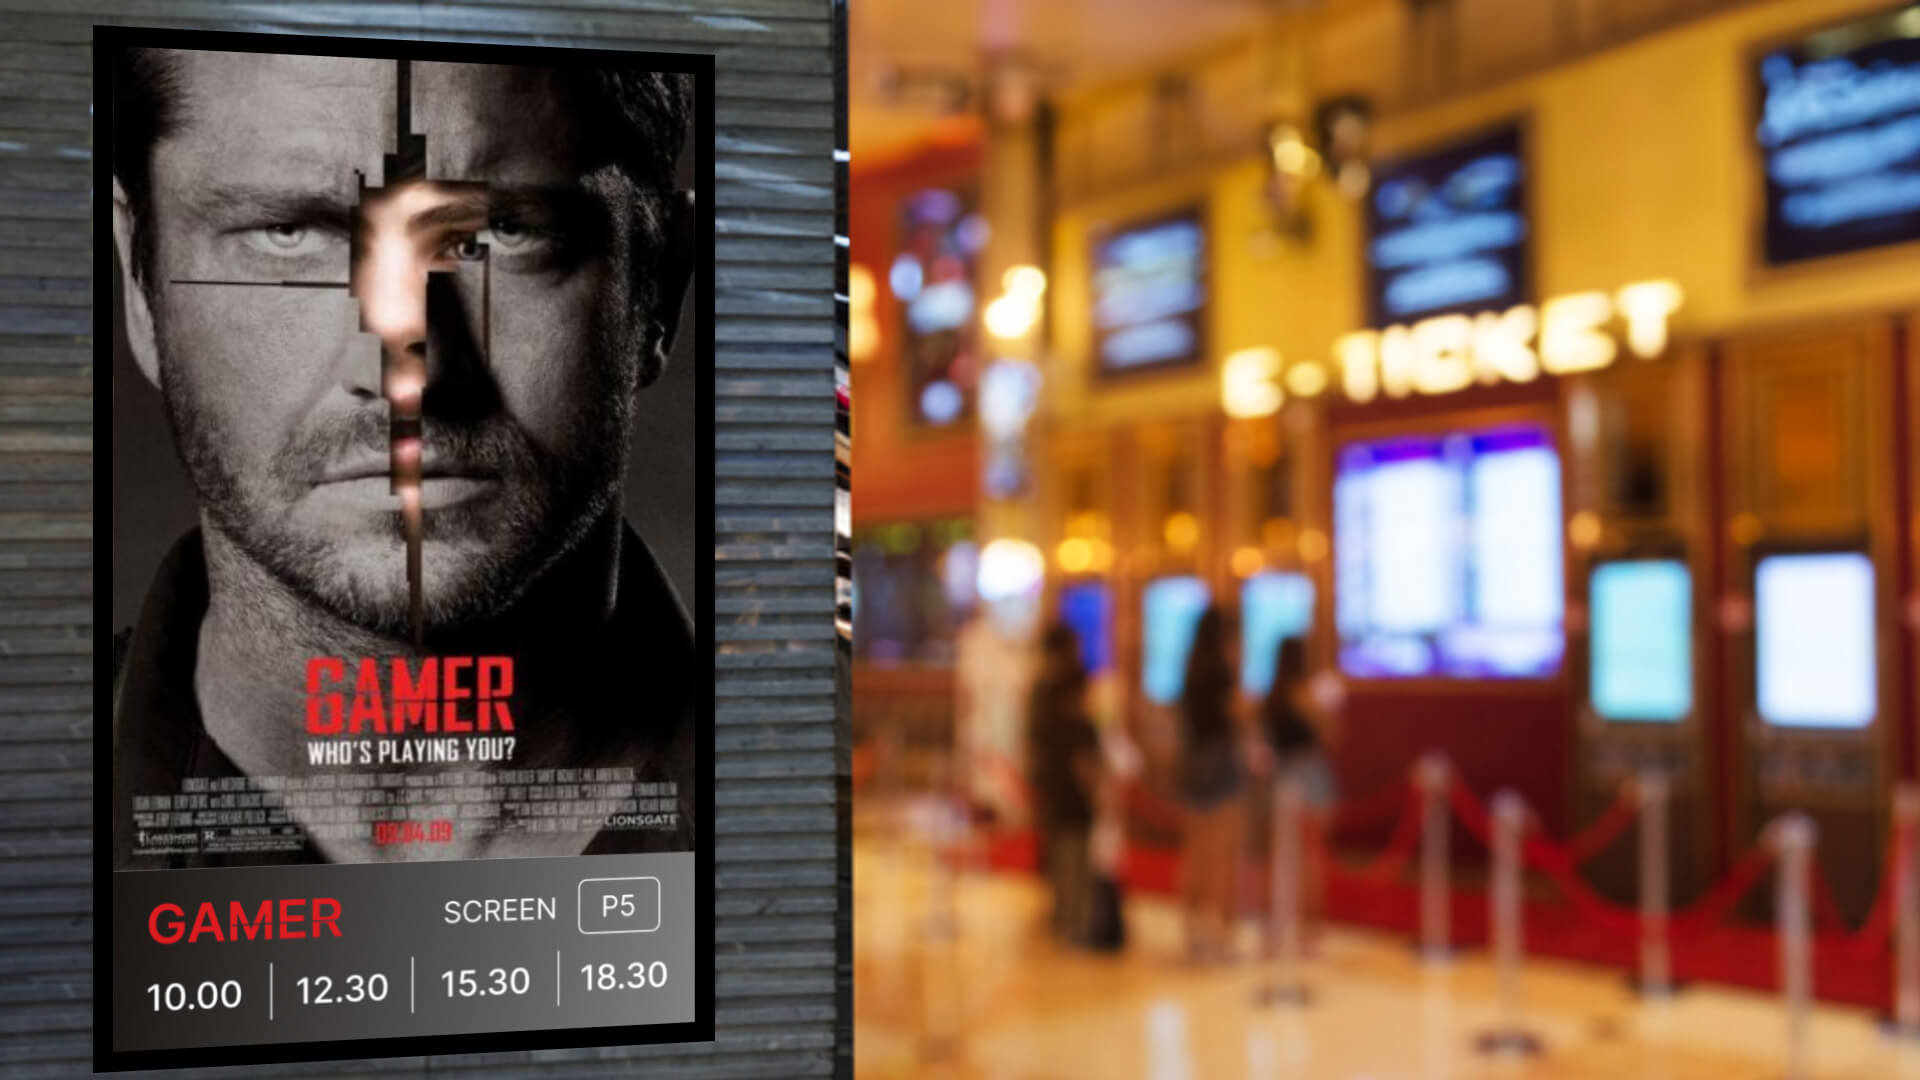 Digital signage screen showing movie timings and trailers.